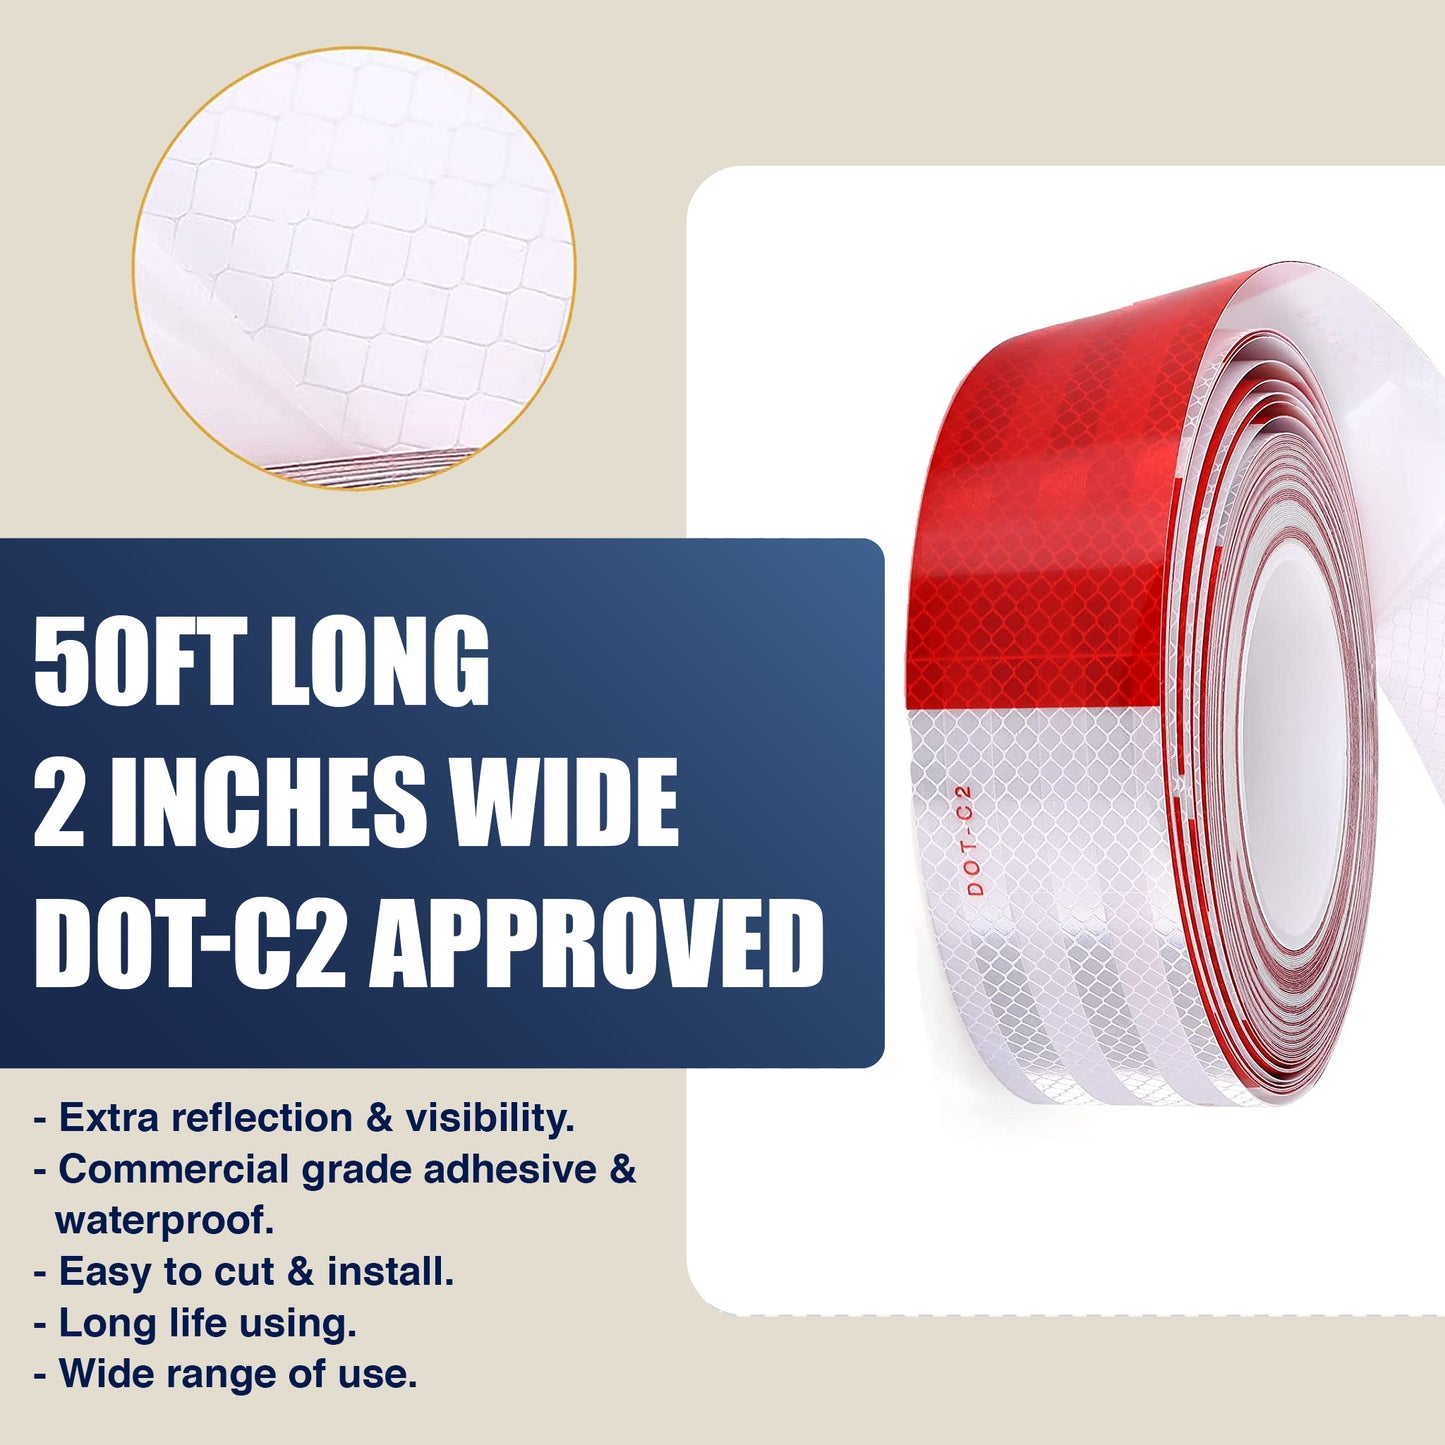 EHS 2in x 100FT Reflective Safety Tape DOT-C2 Waterproof Red and White Adhesive conspicuity tape for trailer, outdoor, cars, trucks